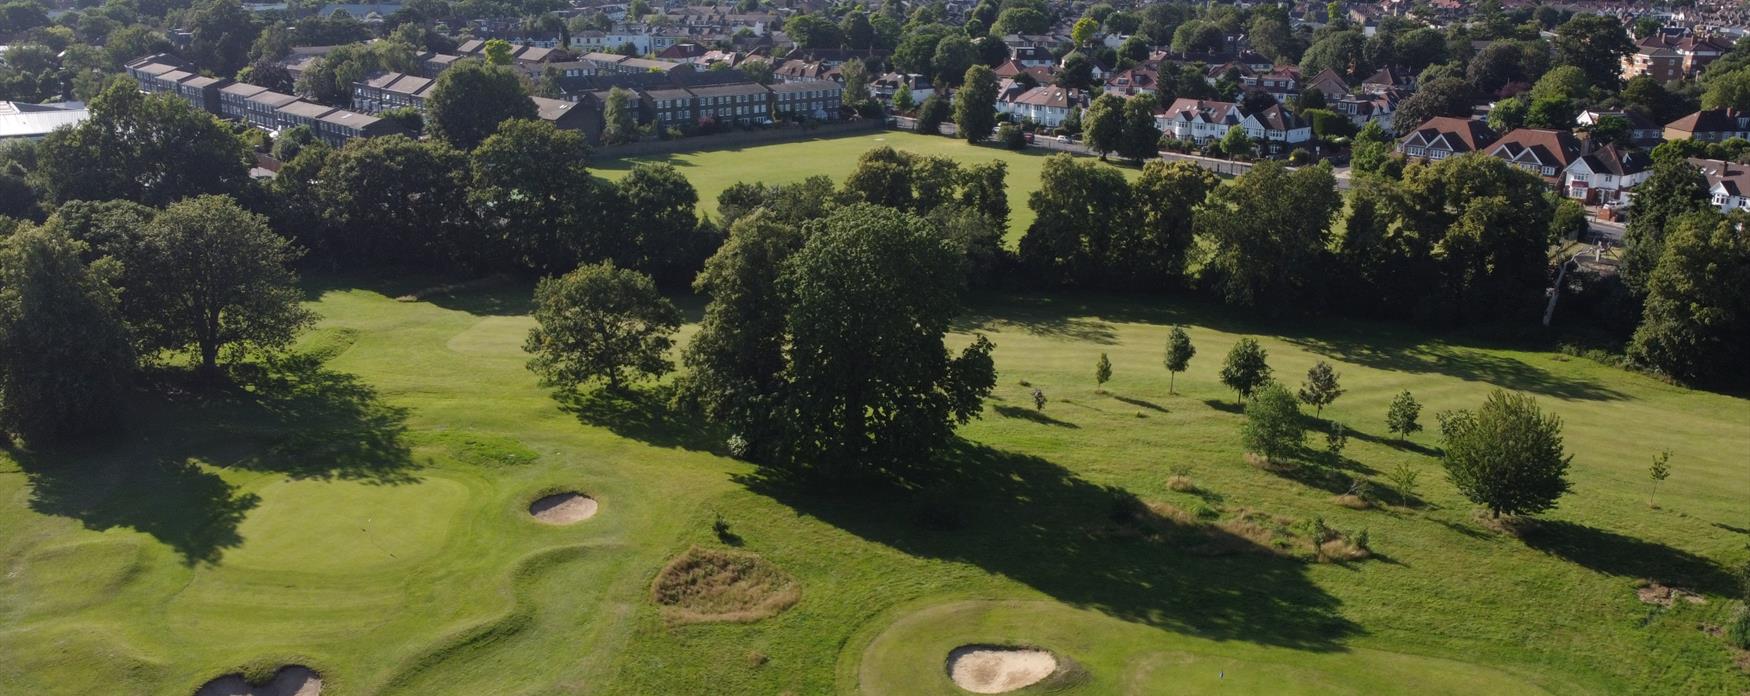 A picture of Strawberry Hill Golf Club